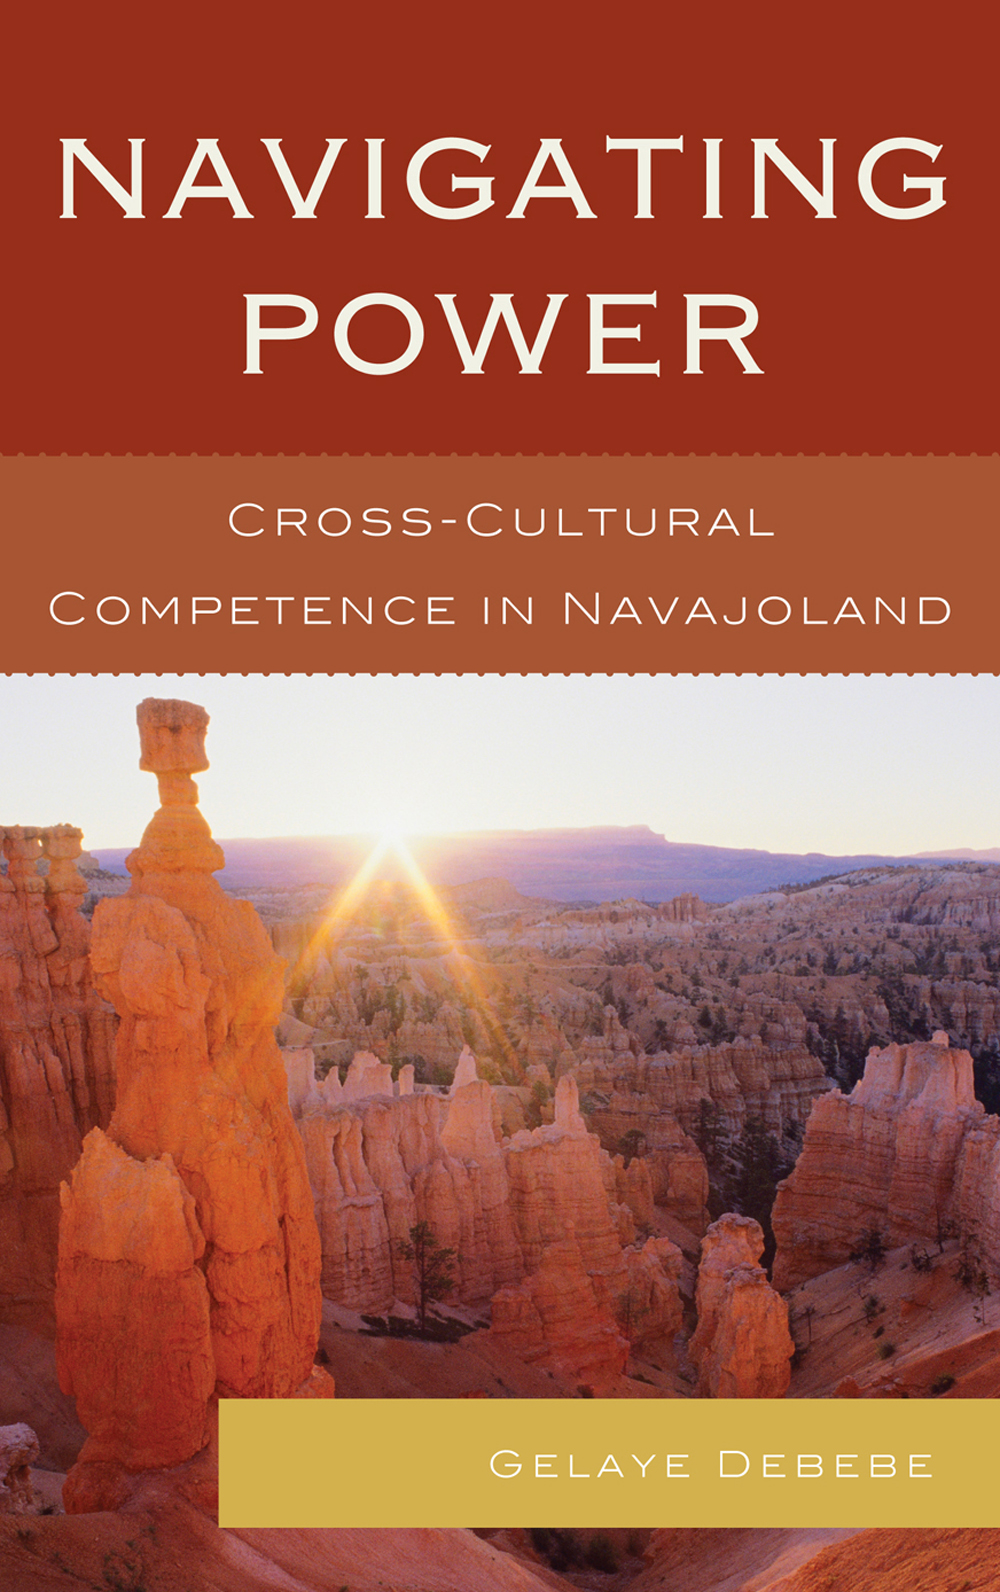 Navigating Power: Cross-Cultural Competence in Navajo Land